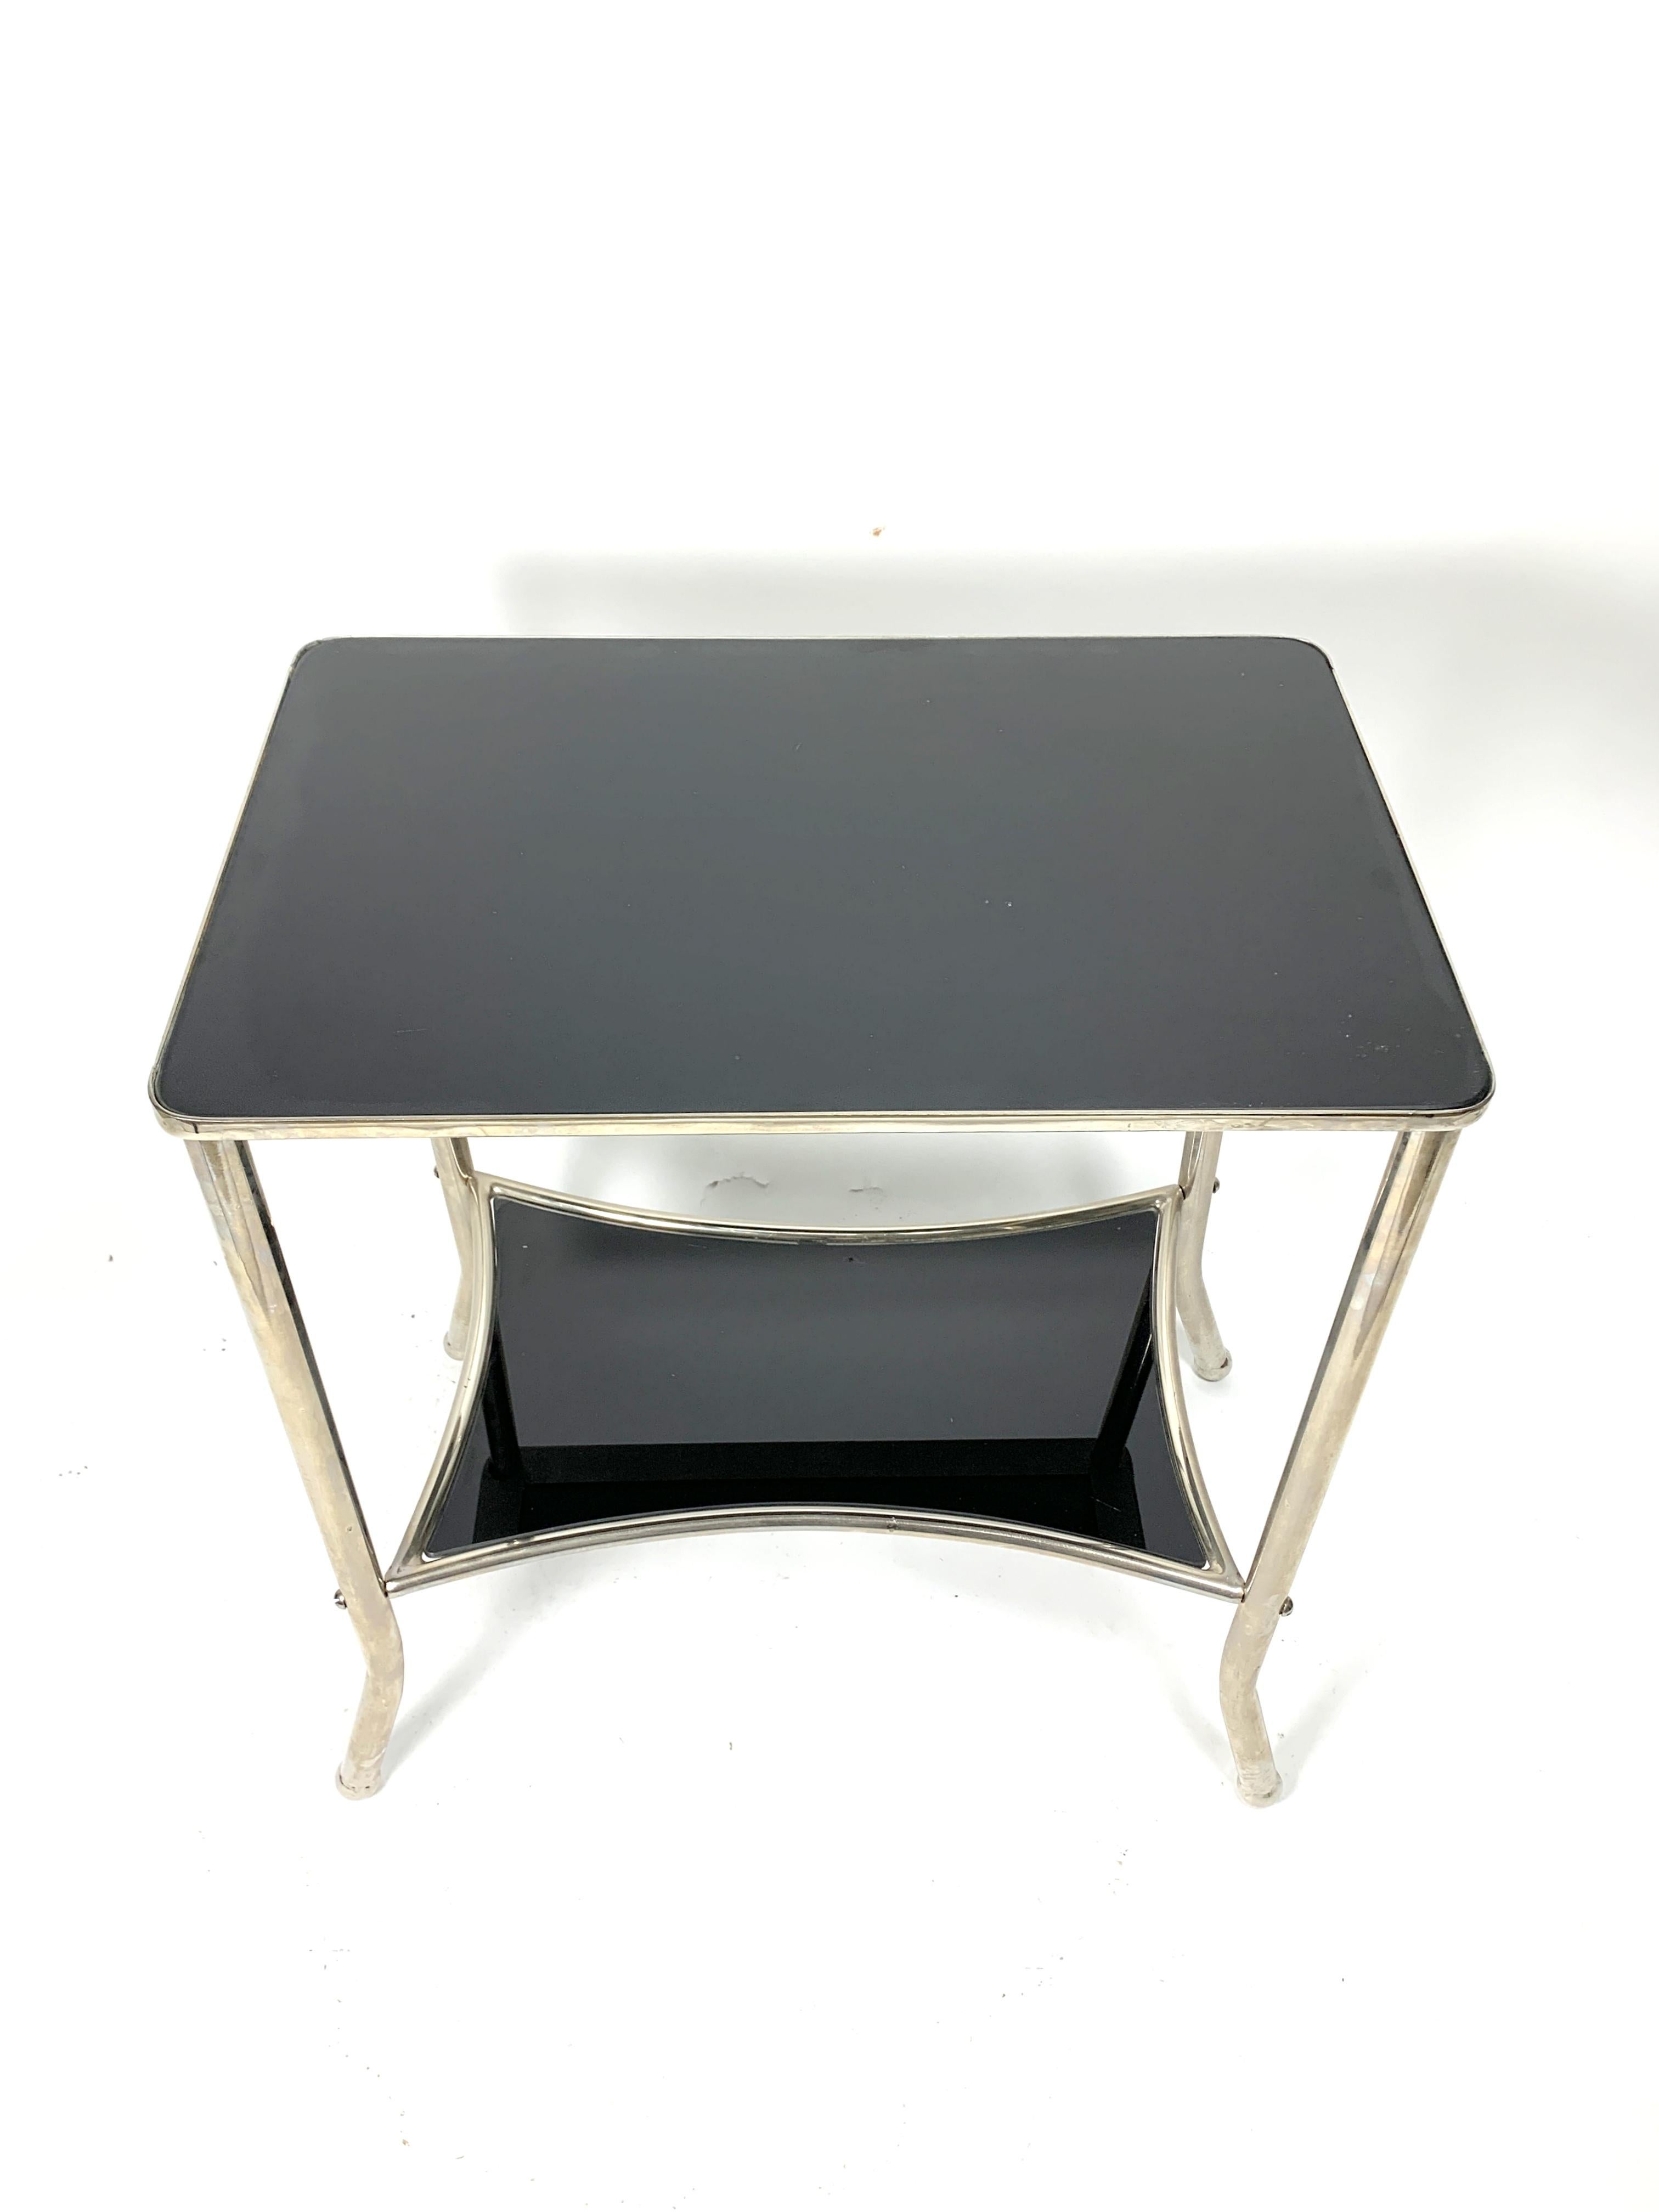 Nickel-plated console table with black glass, 1930s.